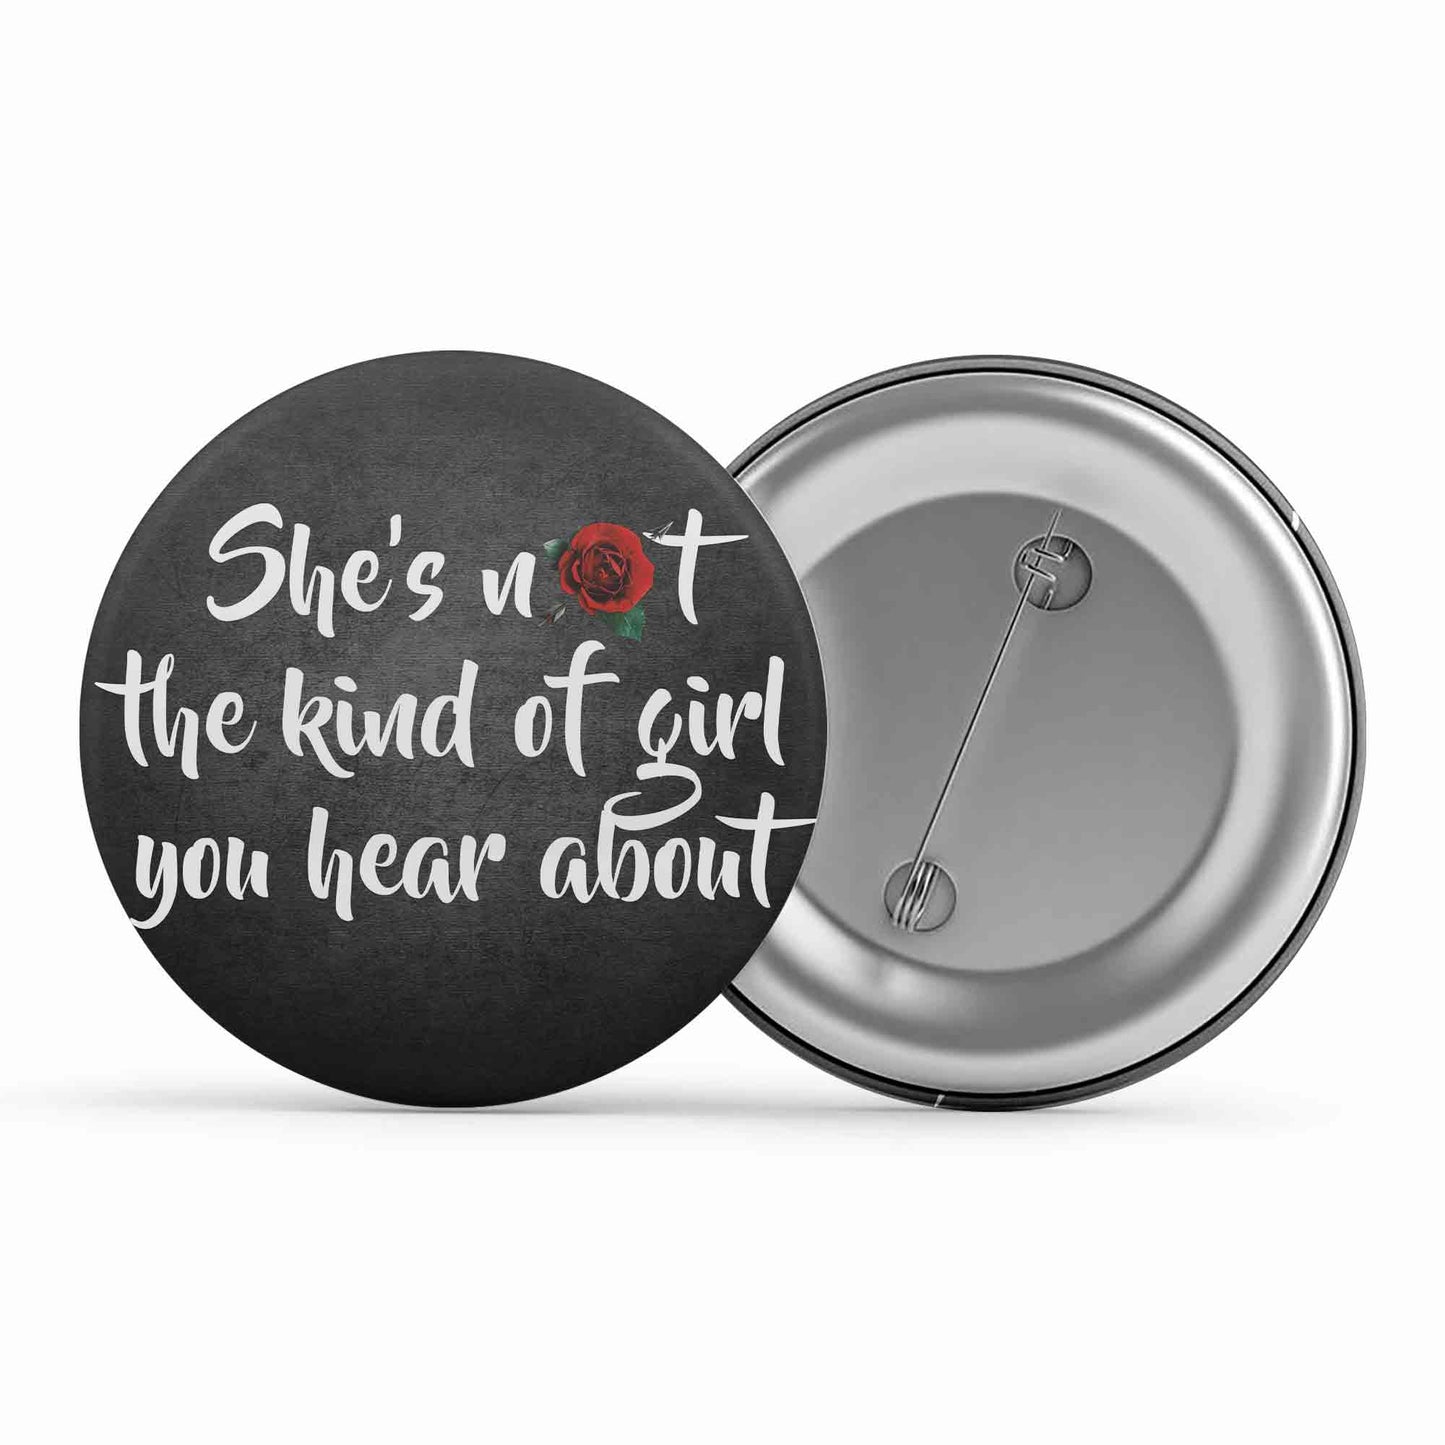 dream theater she's not the kind of girl badge pin button music band buy online india the banyan tee tbt men women girls boys unisex  - hollow years